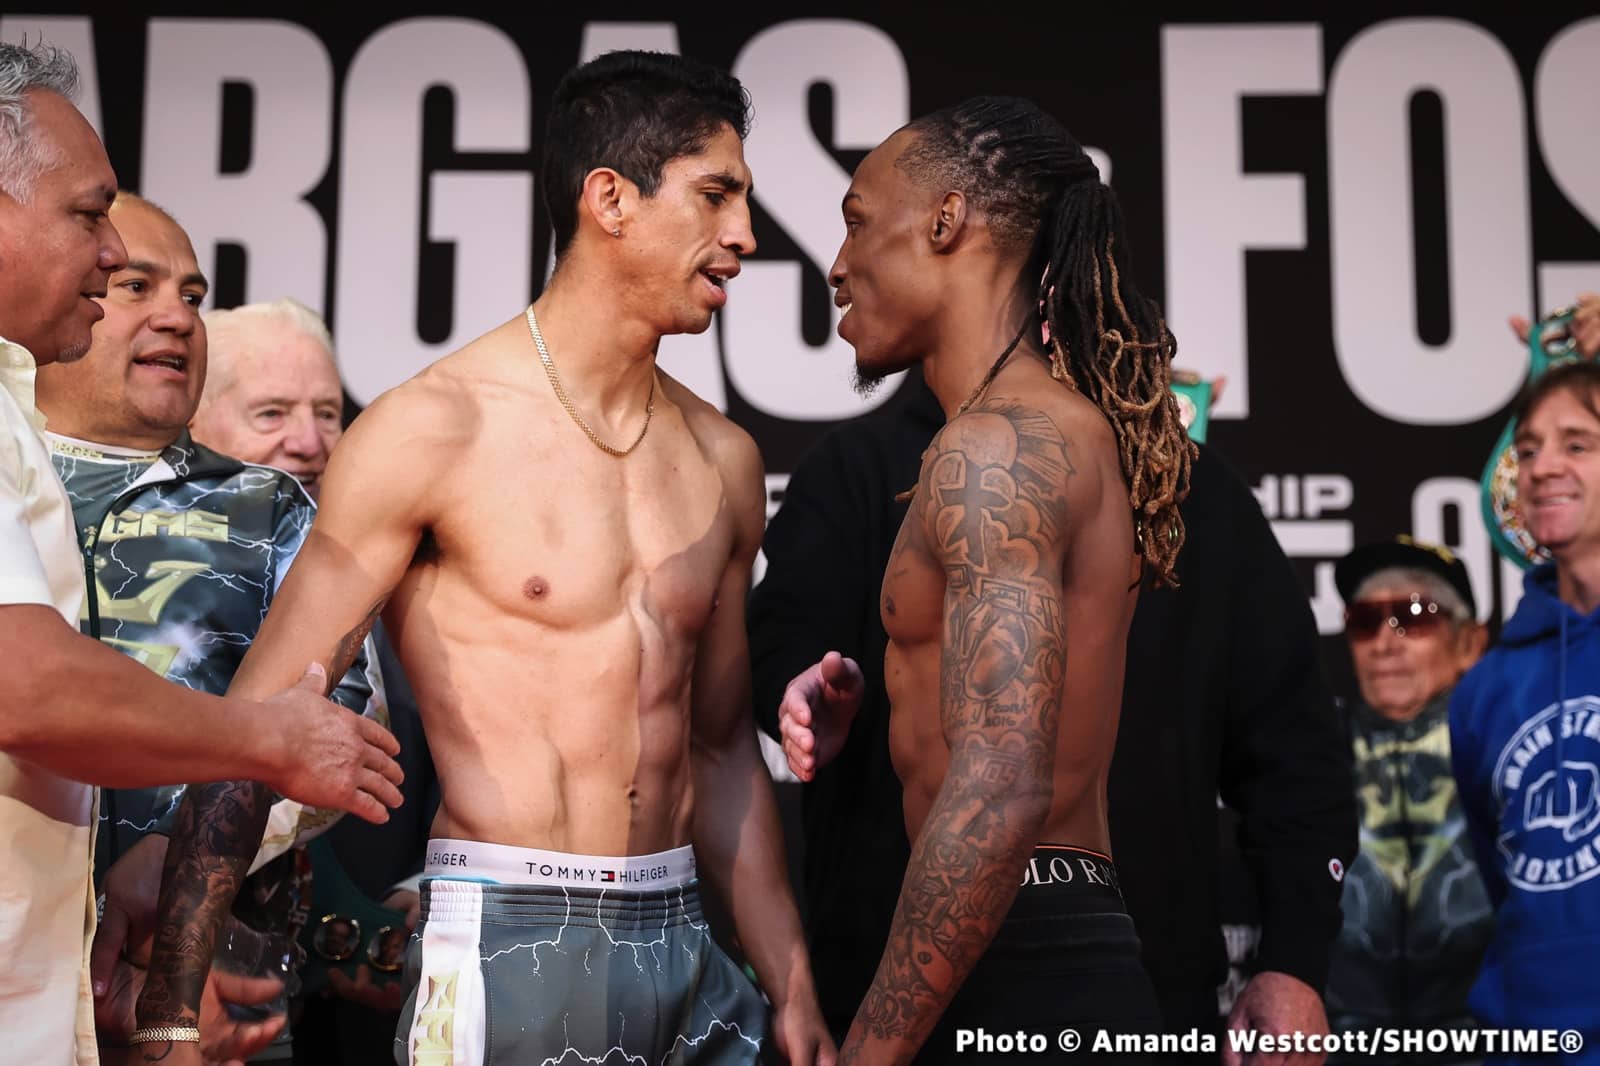 Image: Rey Vargas 129.4 vs. O’Shaquie Foster 129.4 - Weigh In Results